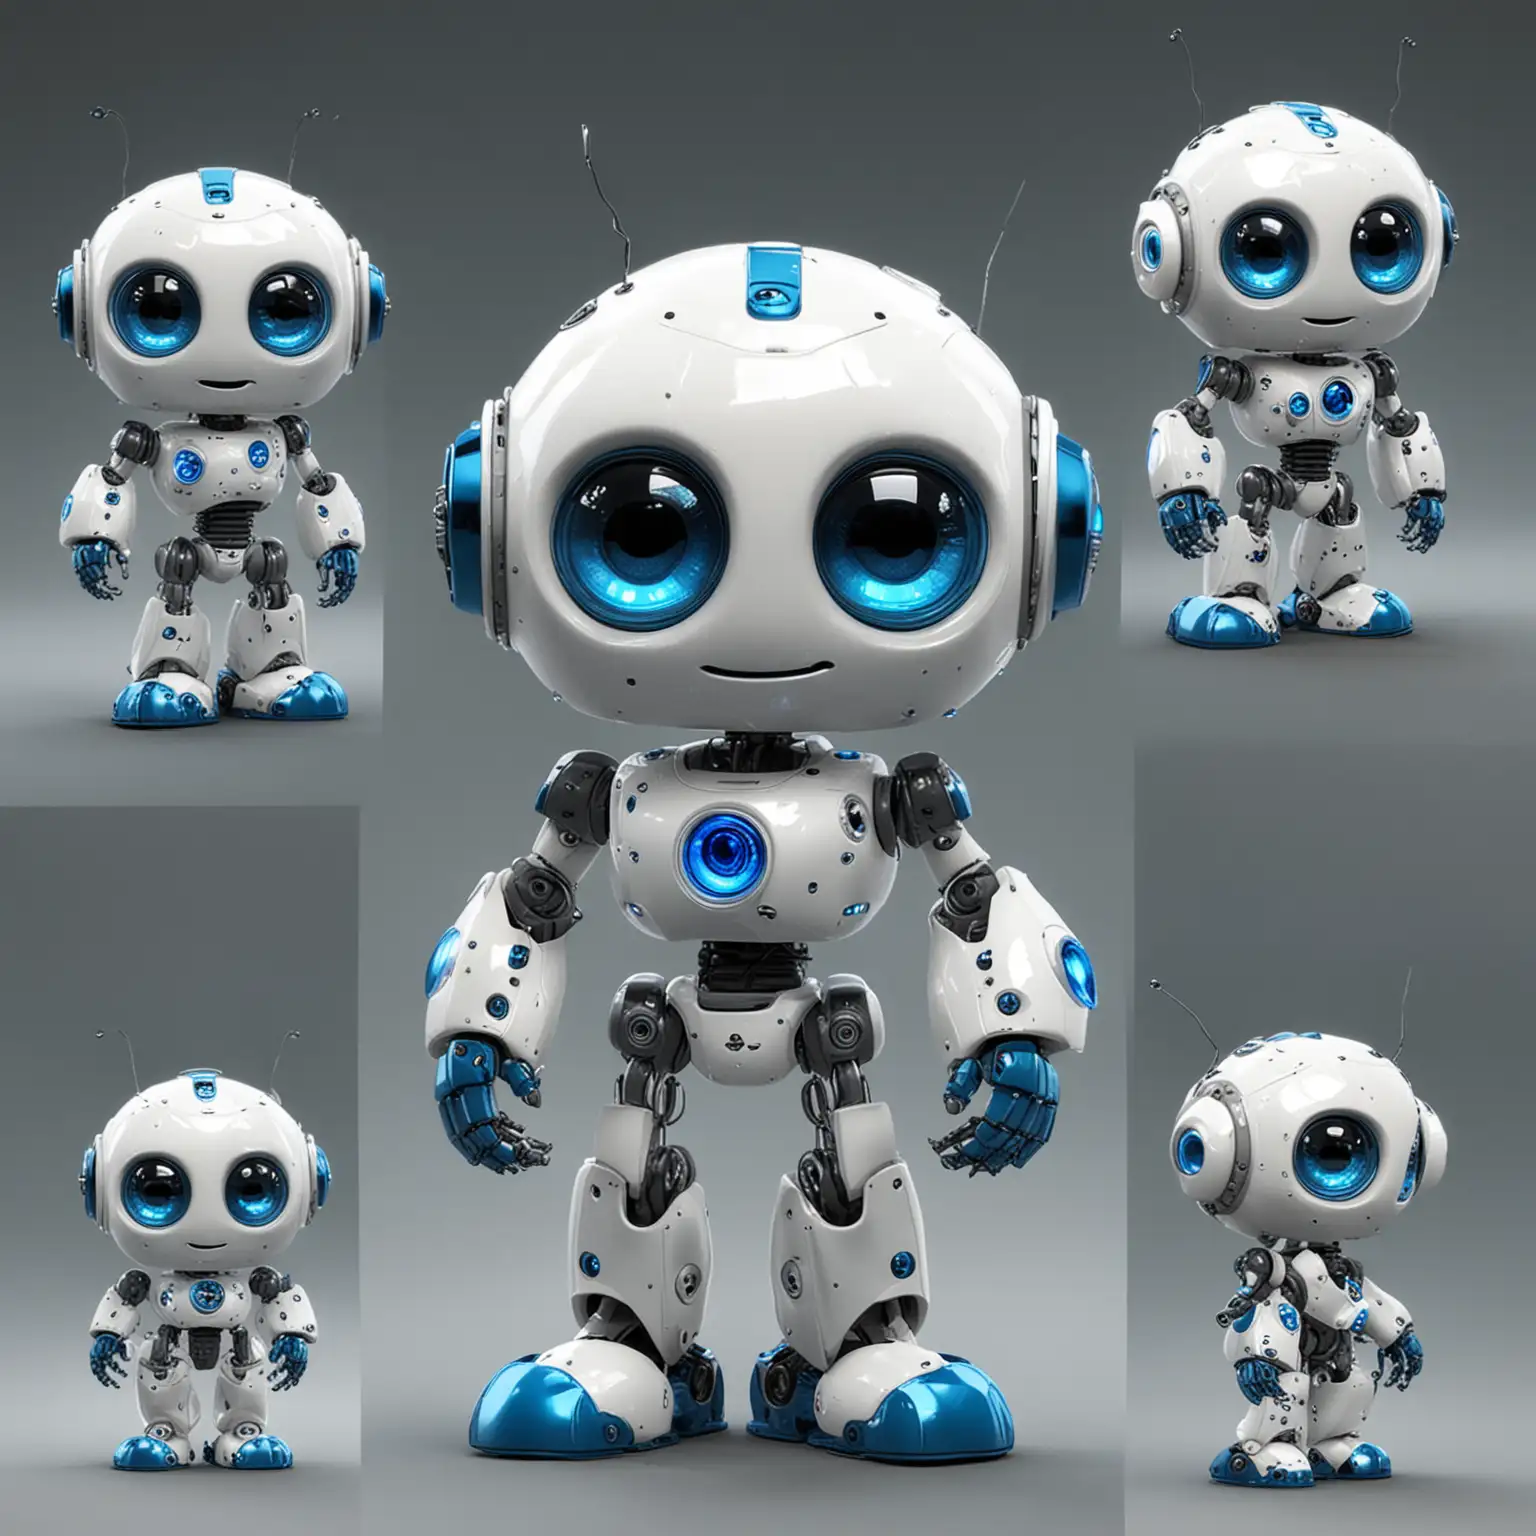 The sam small robot that can fluctute in the air. It has big eyes, its skin is shiny and it's formas are mostry rounded. it looks happy. I want it to look like it is smiling. Make it the same robot, but in 4 different poses. IT has blue eyes, one antena, and its colours ate white and dark blue.